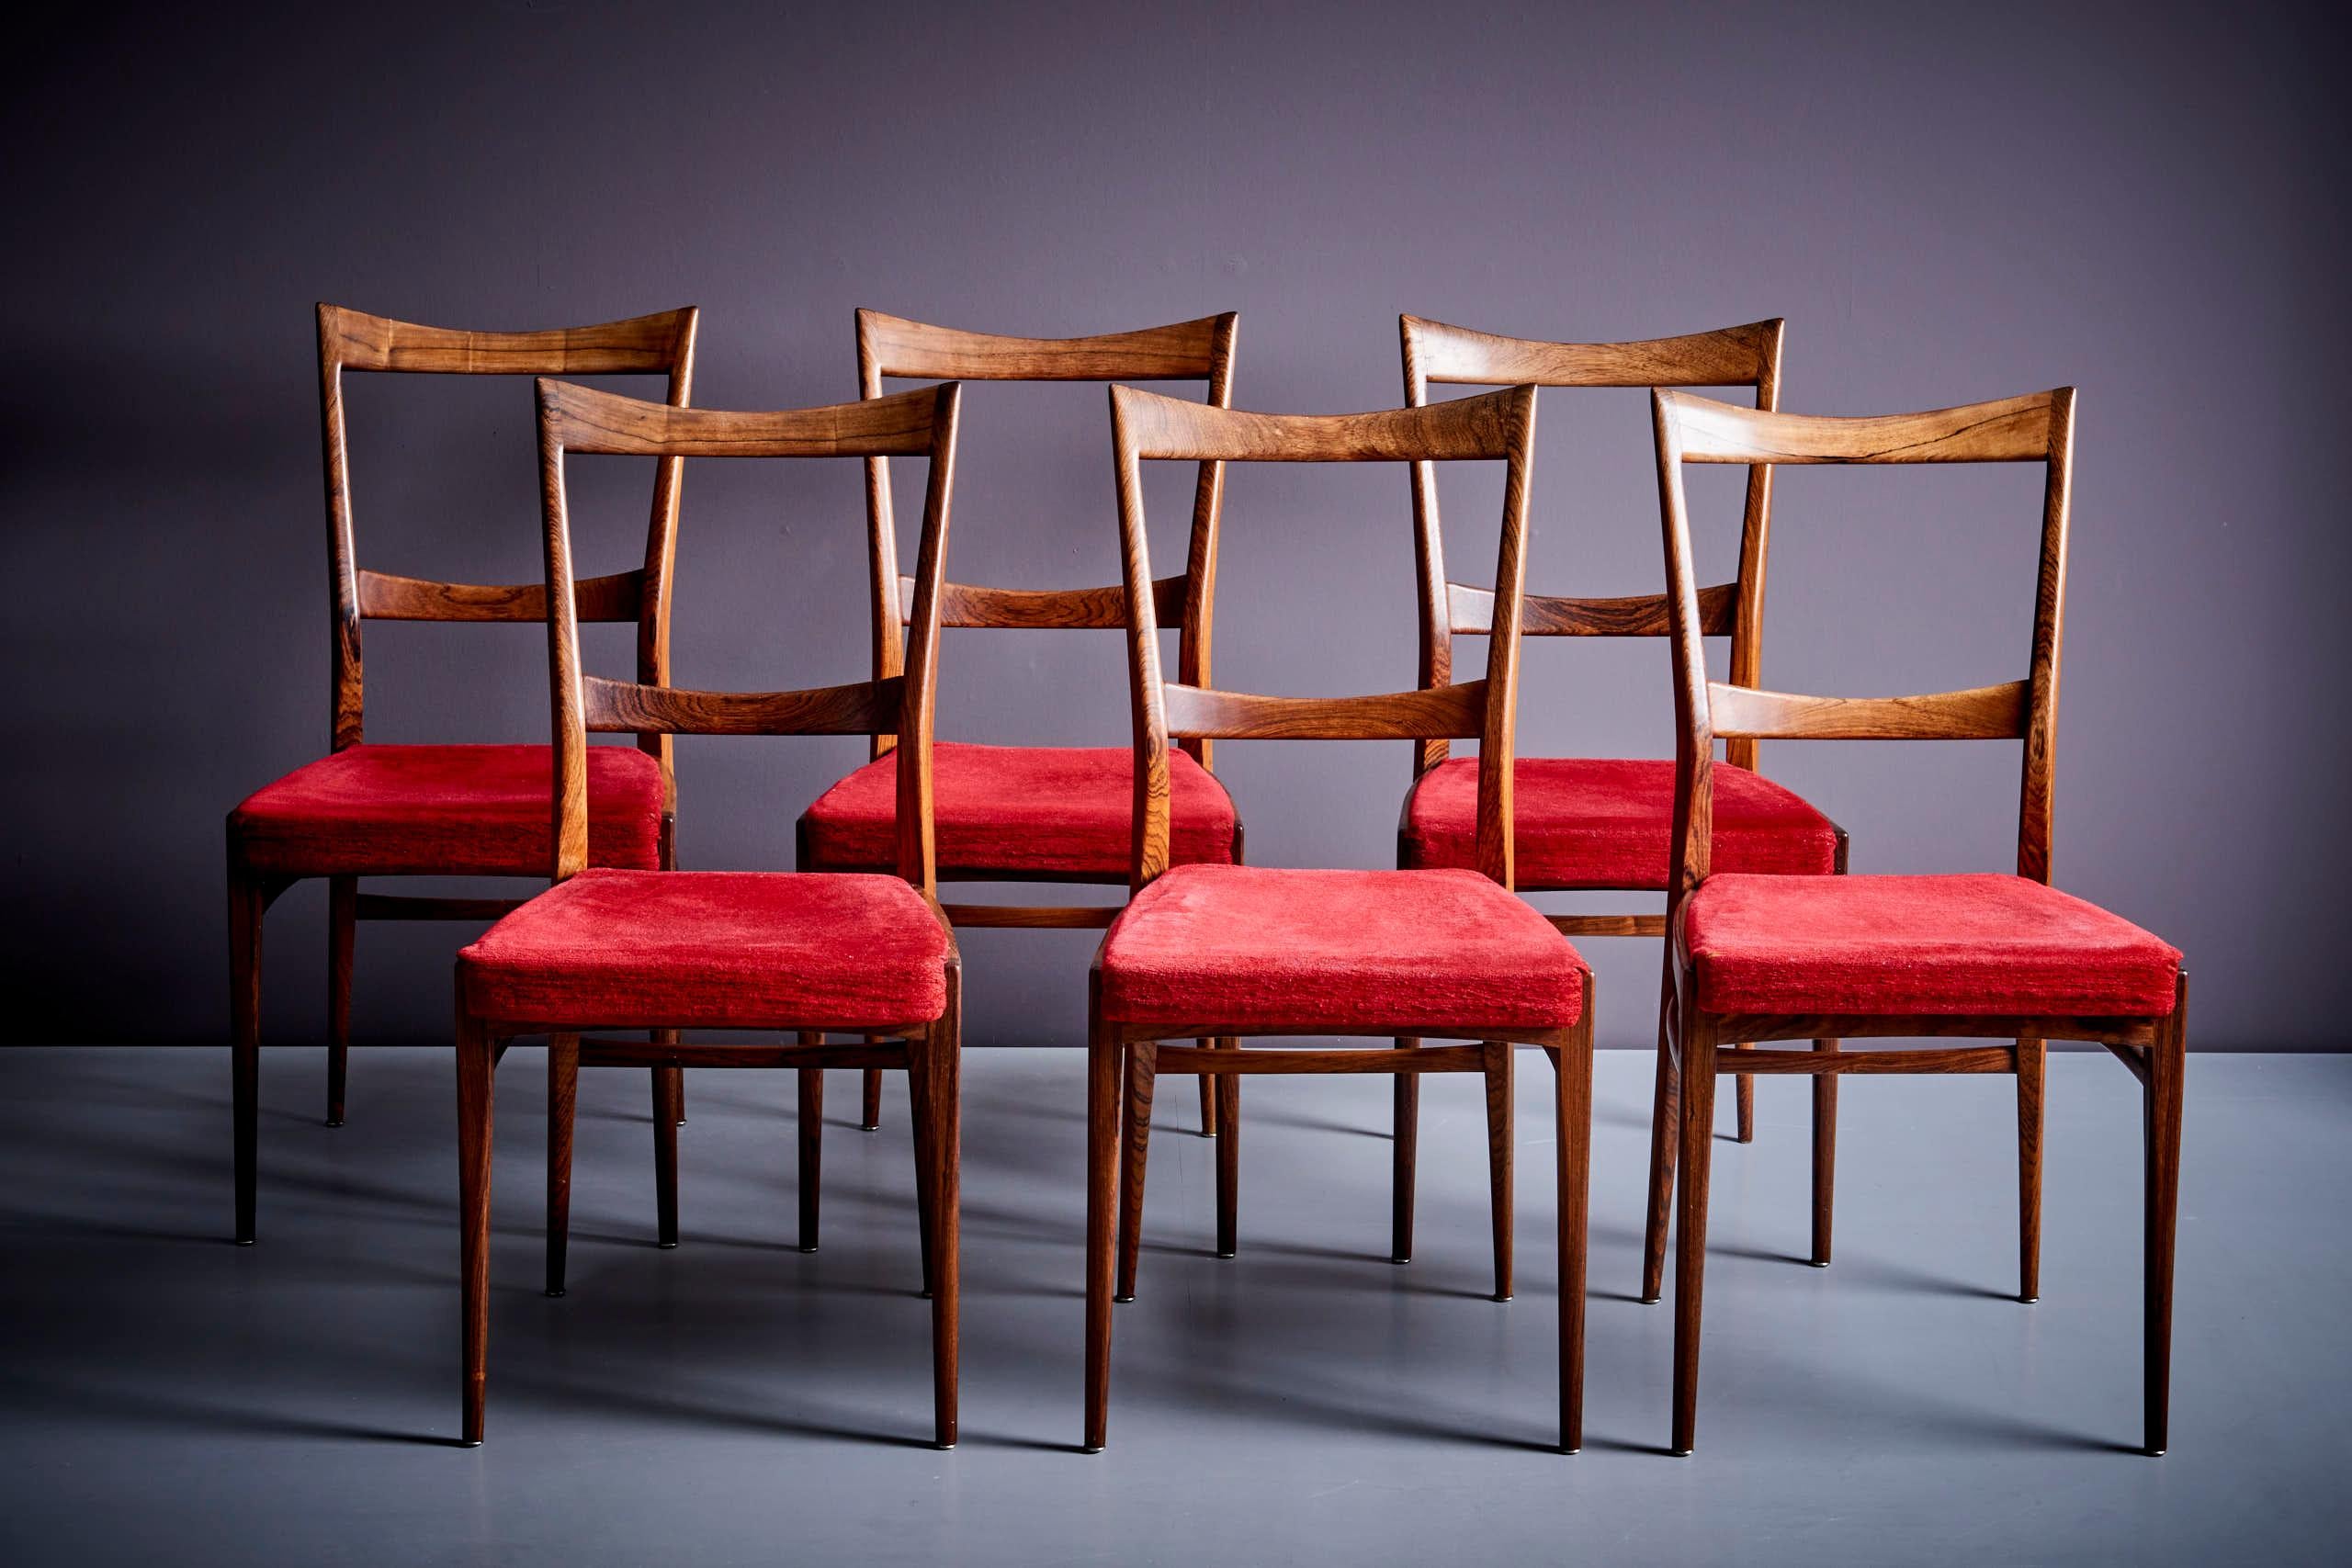 Set of 6 Rosewood Dining Chairs in the manner of Ico Parisi, Italy - 1960s.